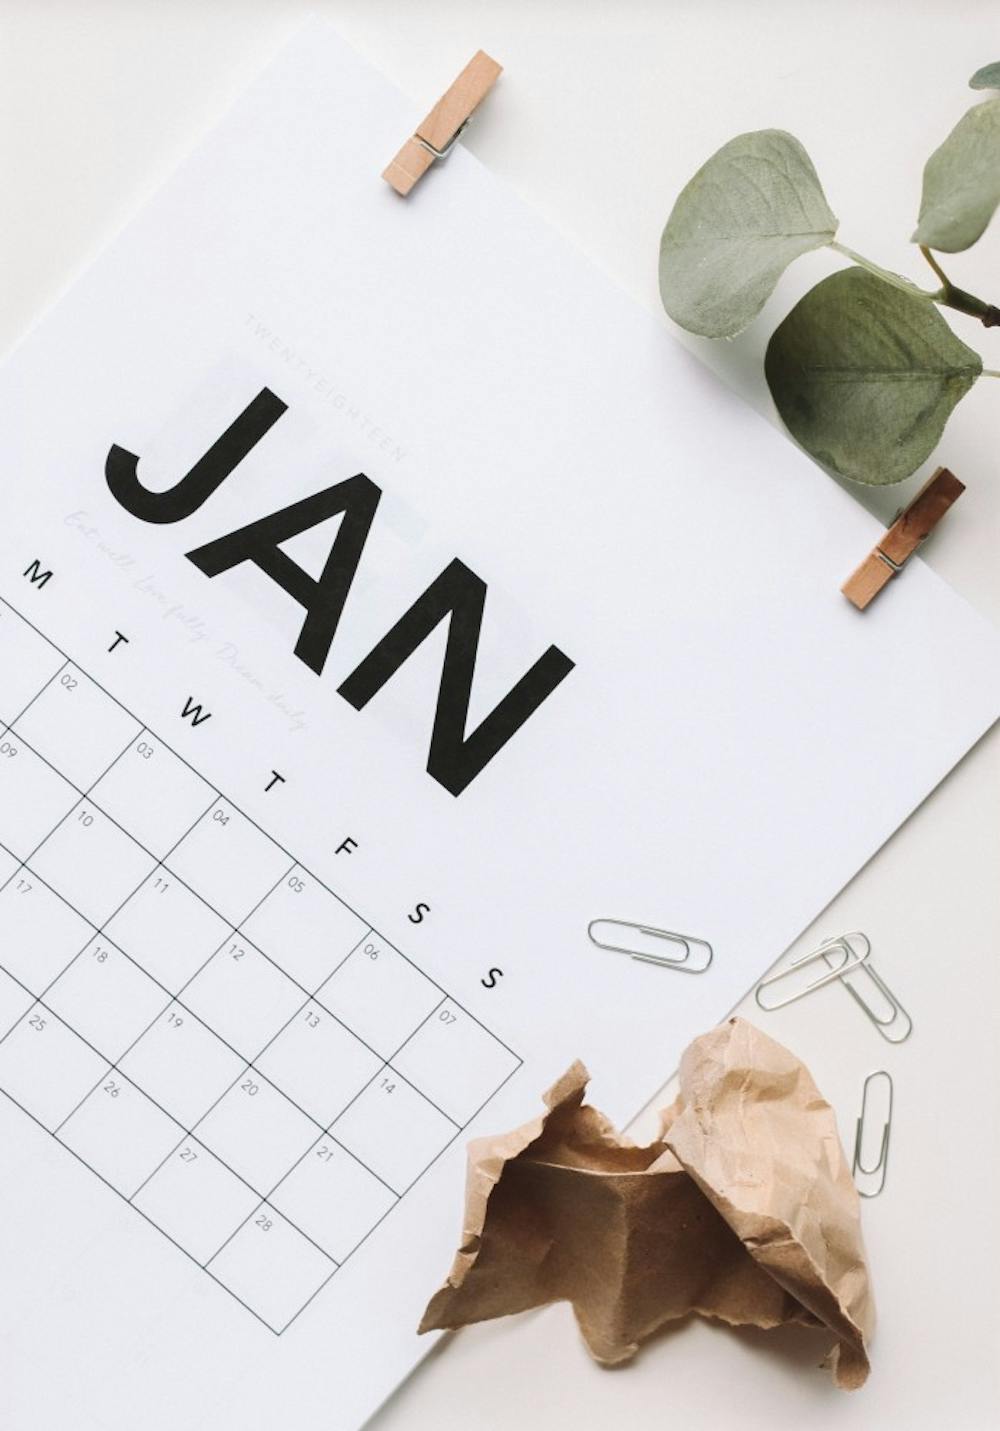 DIY calendars from Pinterest can help keep you organized, while also decorating you bedroom or office space. Maddi Bazzocco, Unsplash